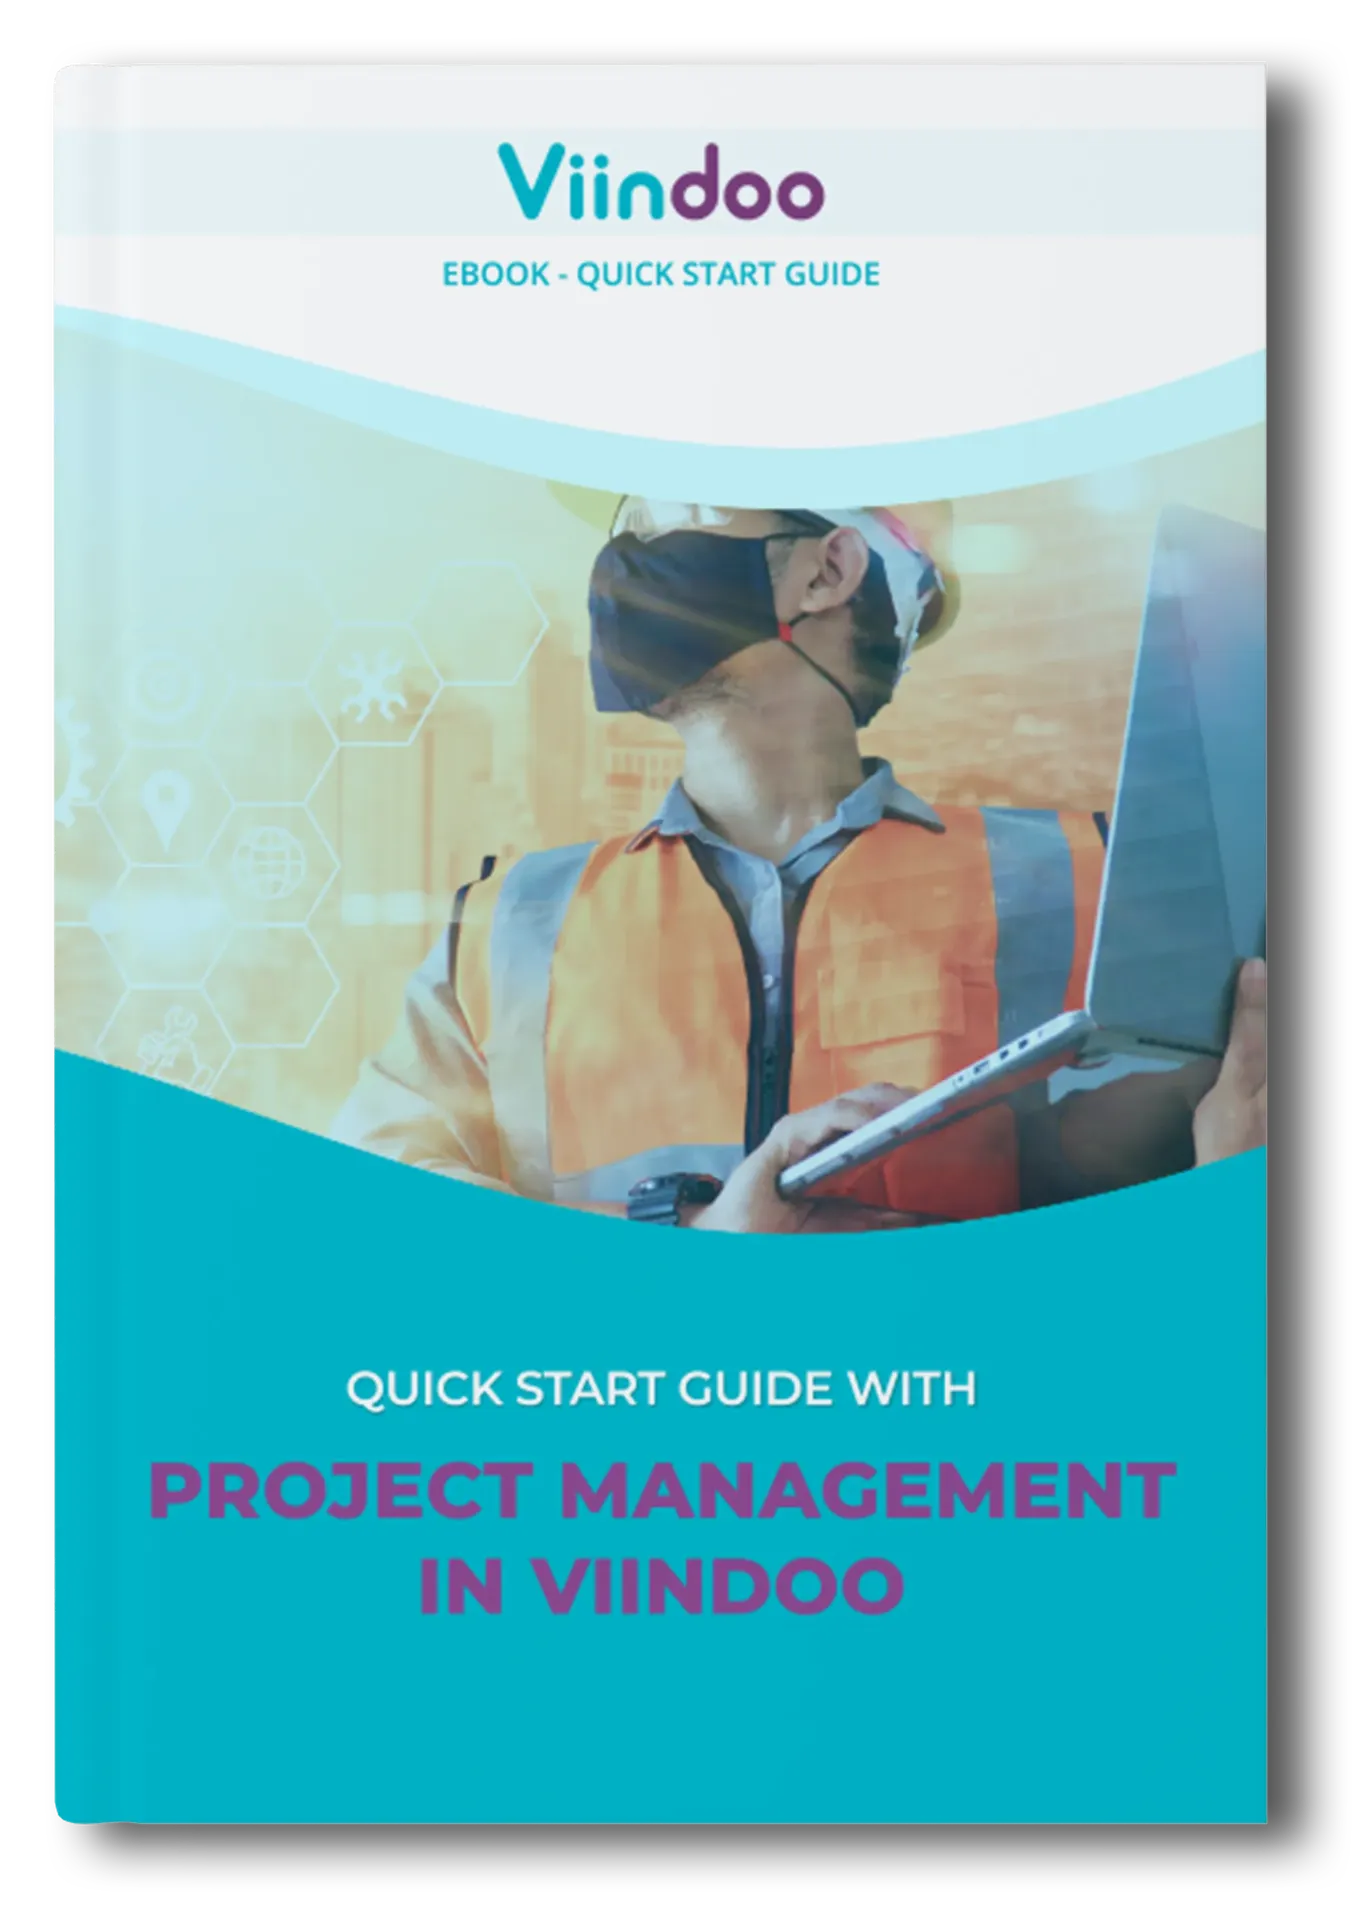 Quick Start Guide with Project Management in Viindoo